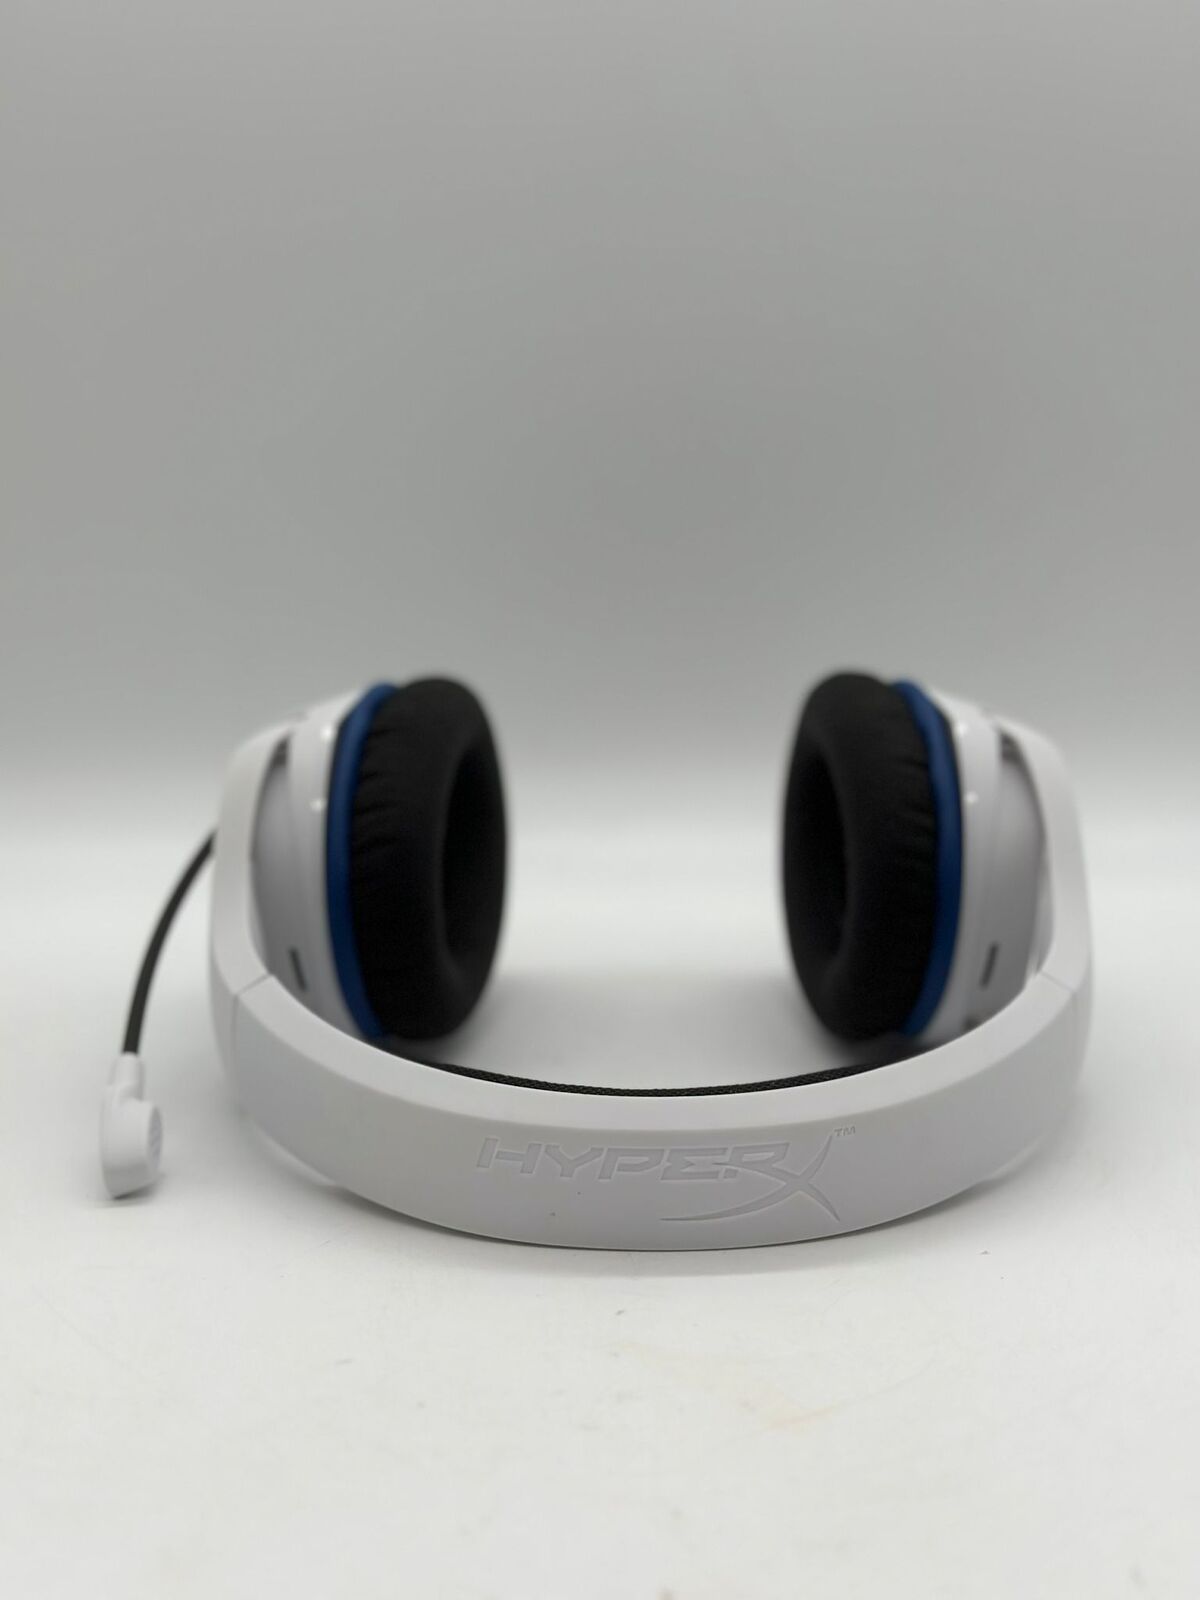 Core Gaming Wireless Stinger Cloud Headset HyperX White (Pre-Owned)